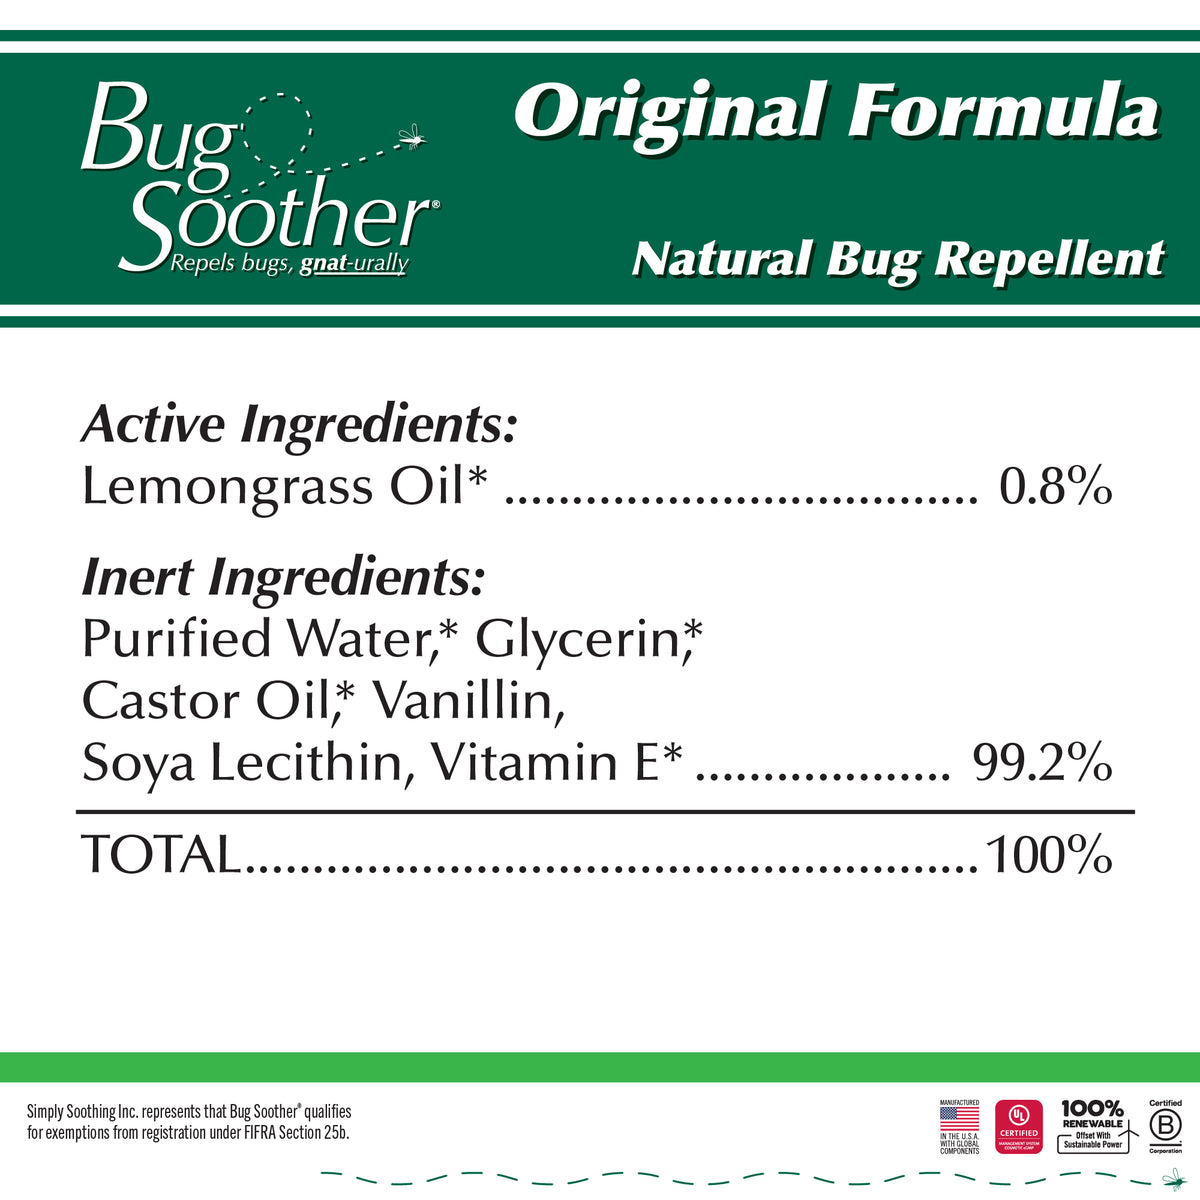 Bug Soother Insect Repellent, 1 Gallon Jug